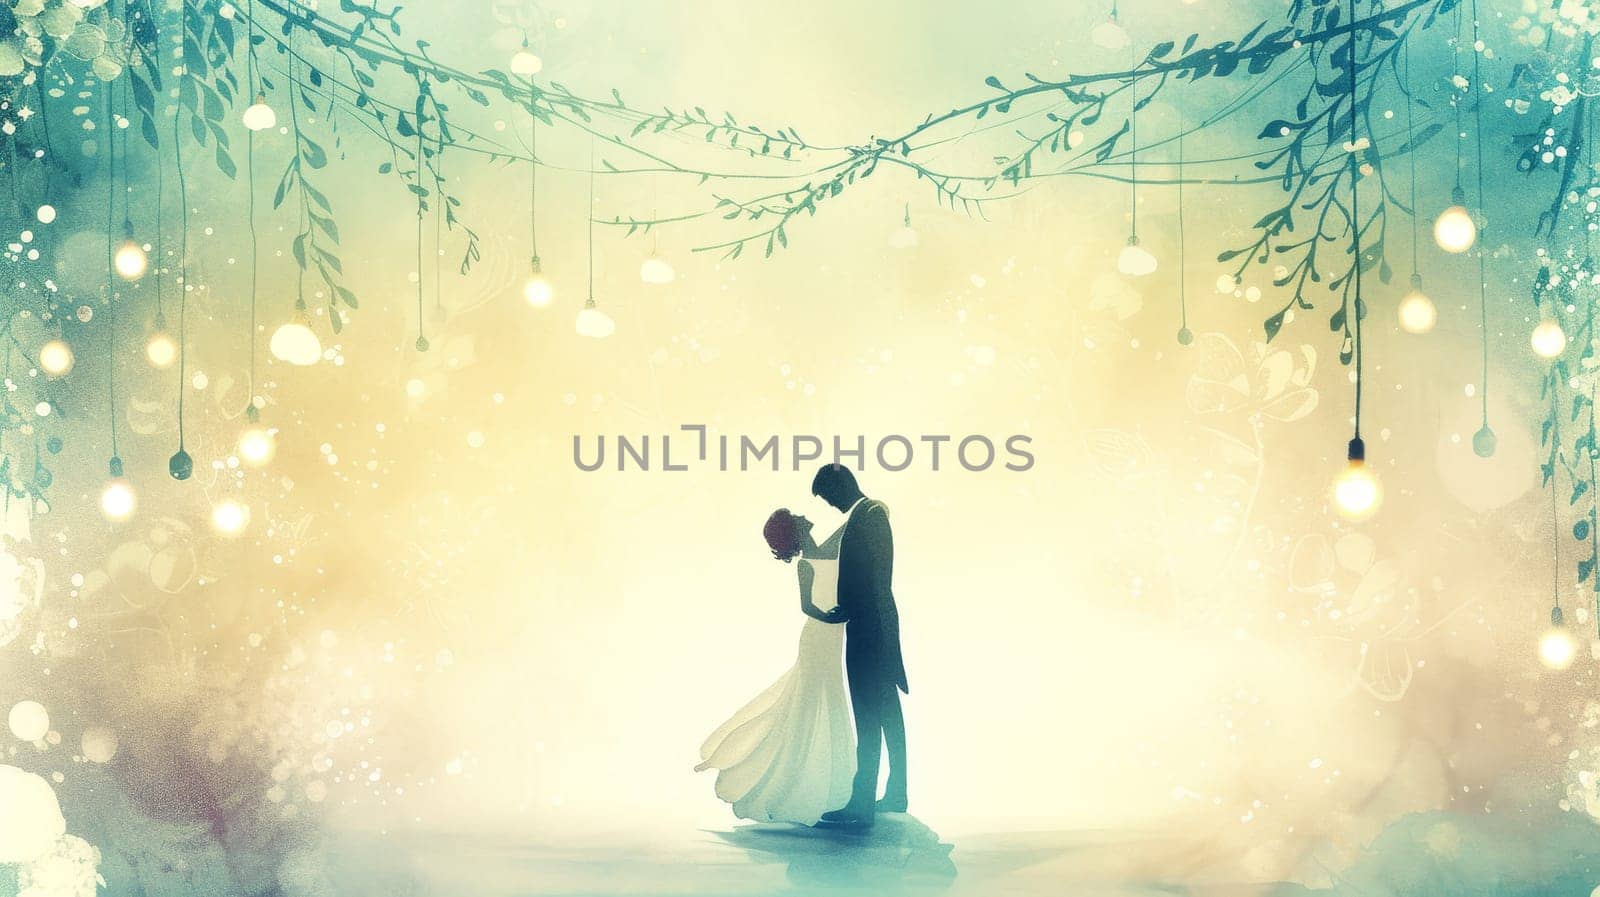 Silhouette of a couple sharing a romantic moment under a whimsical string of lights